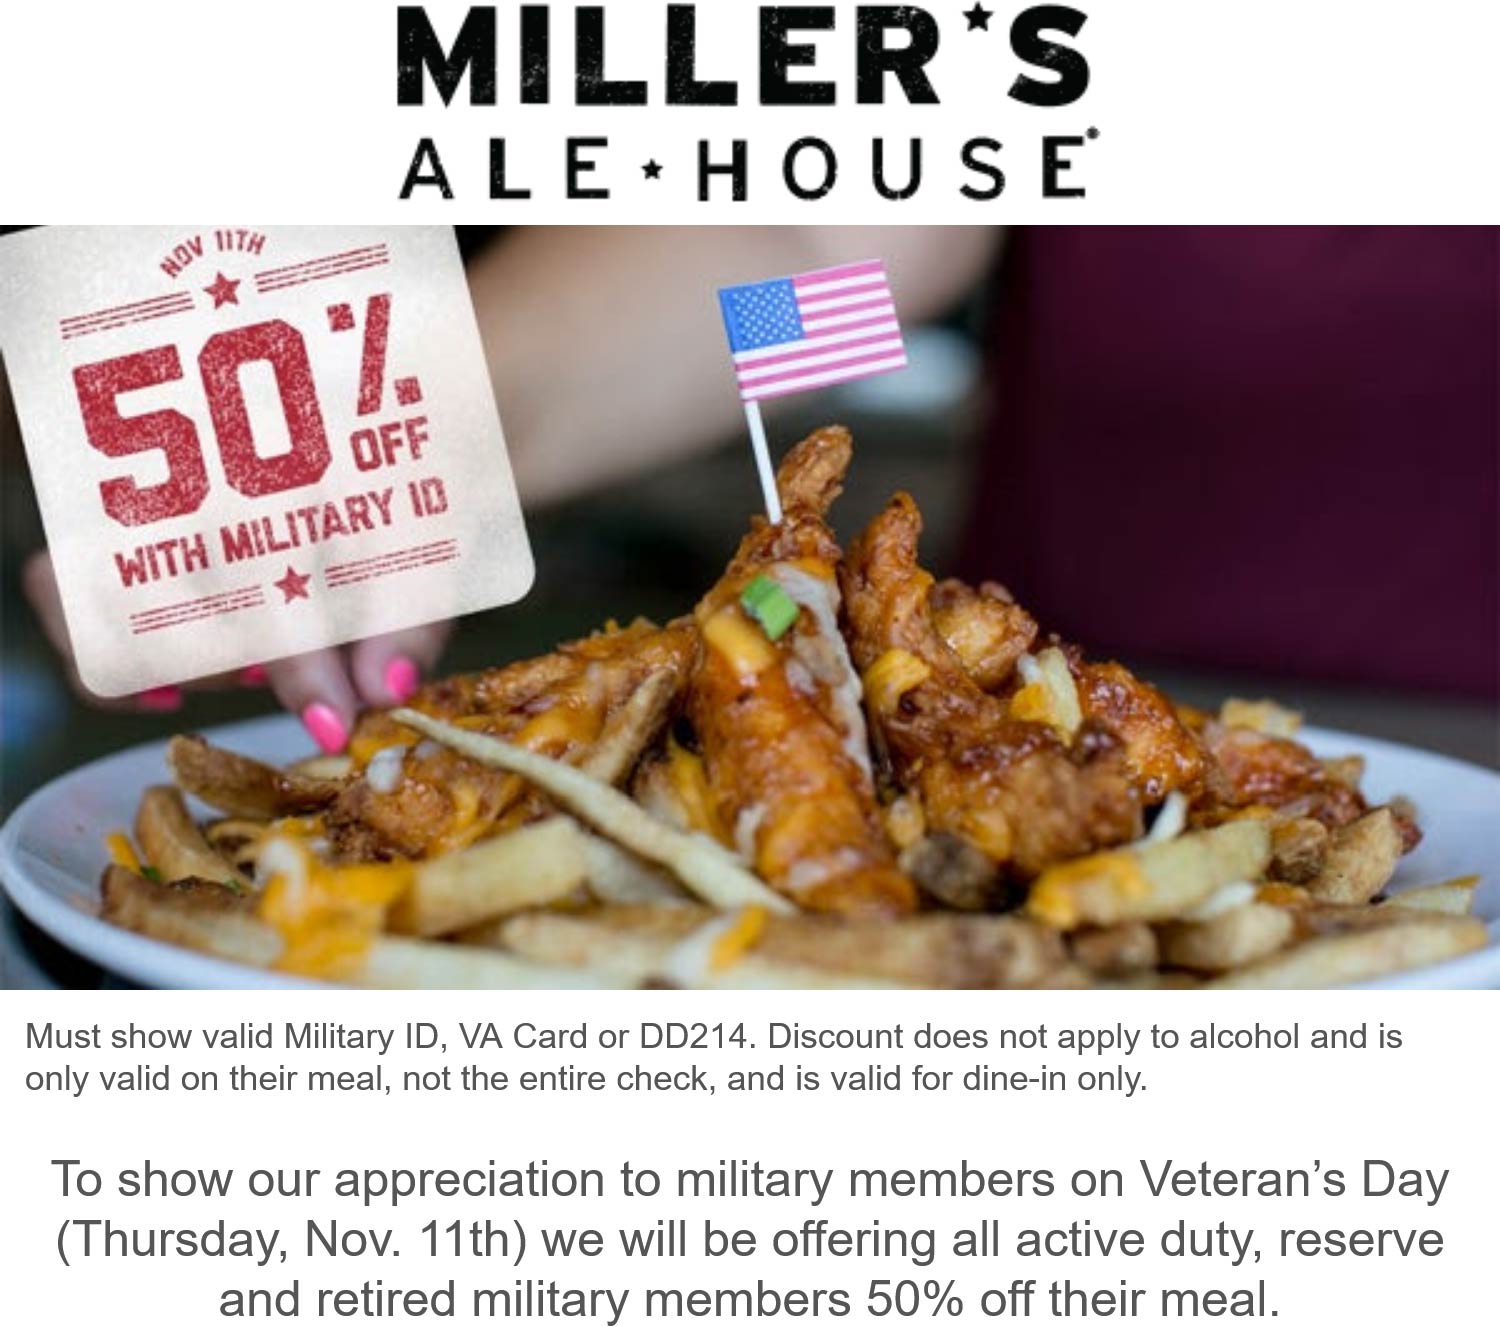 Millers Ale House restaurants Coupon  Military ID = 50% off your meal today at Millers Ale House #millersalehouse 